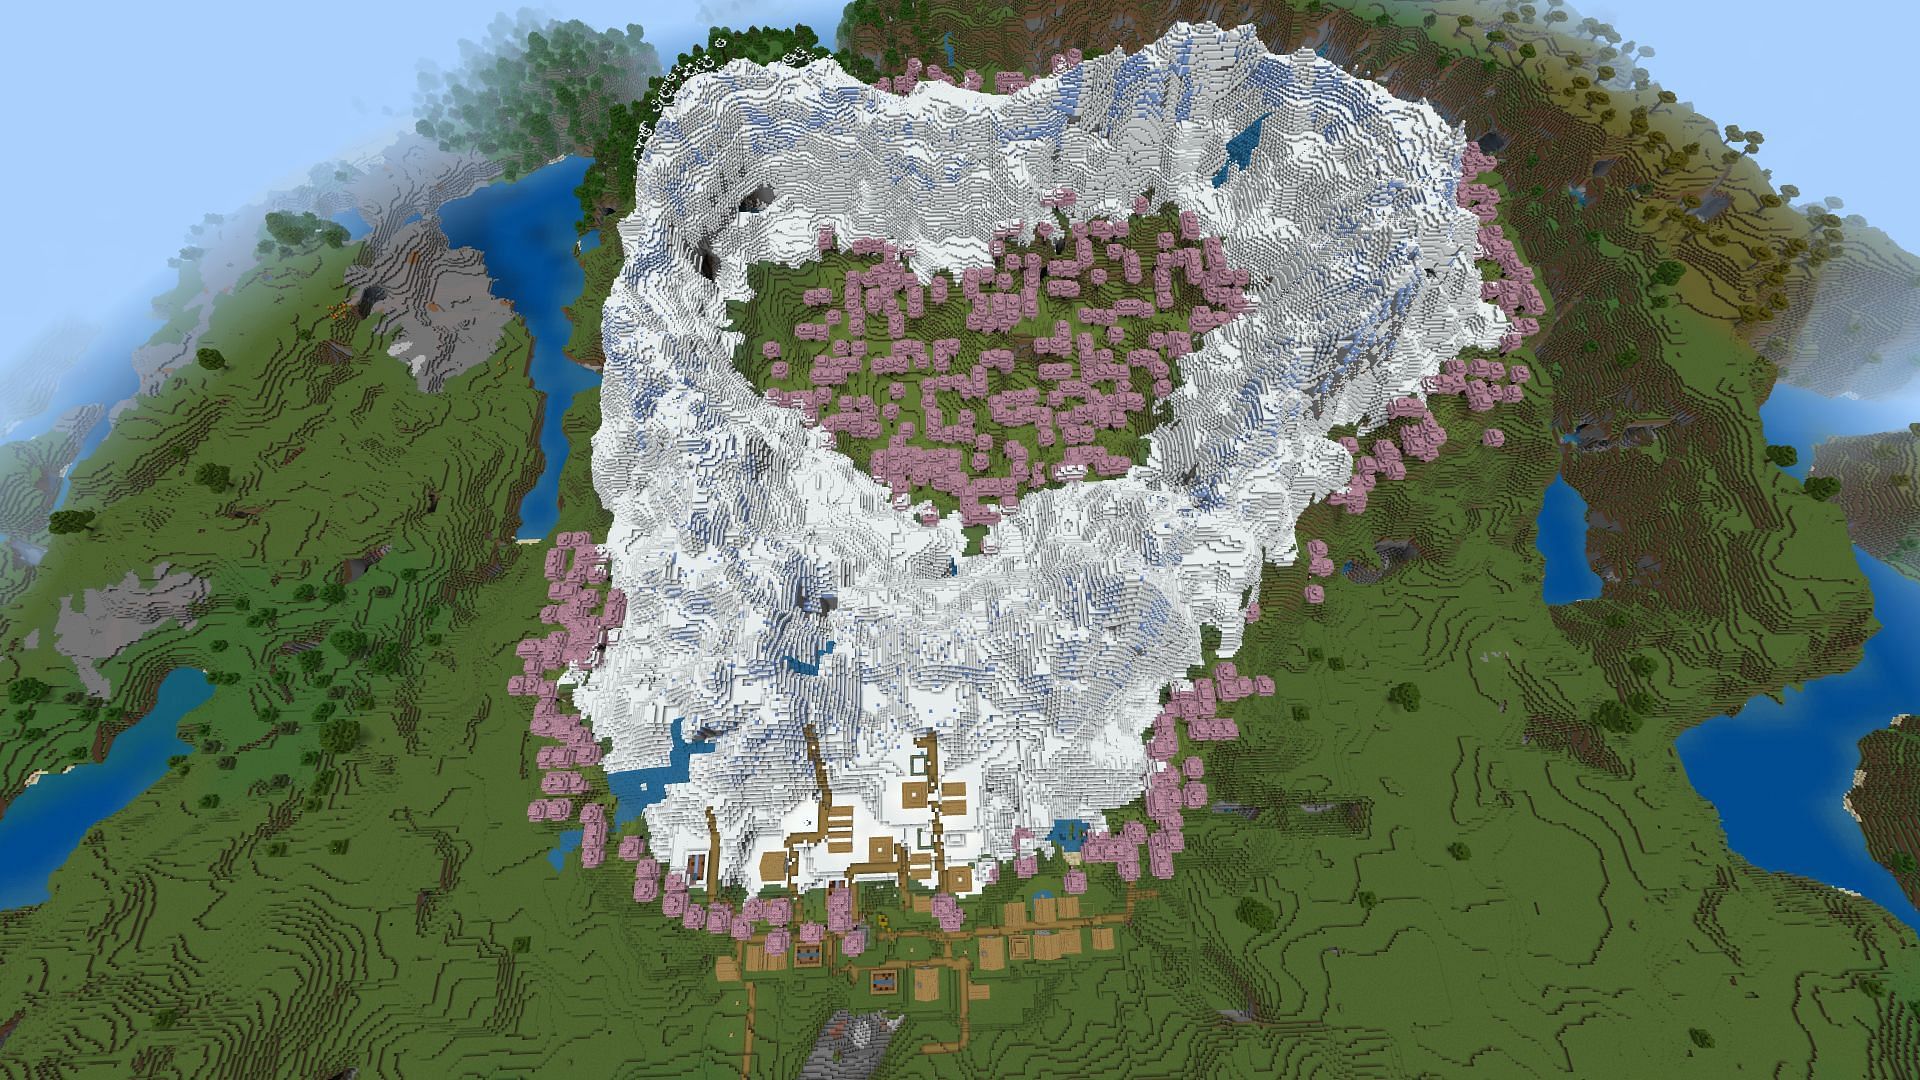 This heart-shaped cherry blossom grove has a few extra upsides in Minecraft (Image via Mojang)